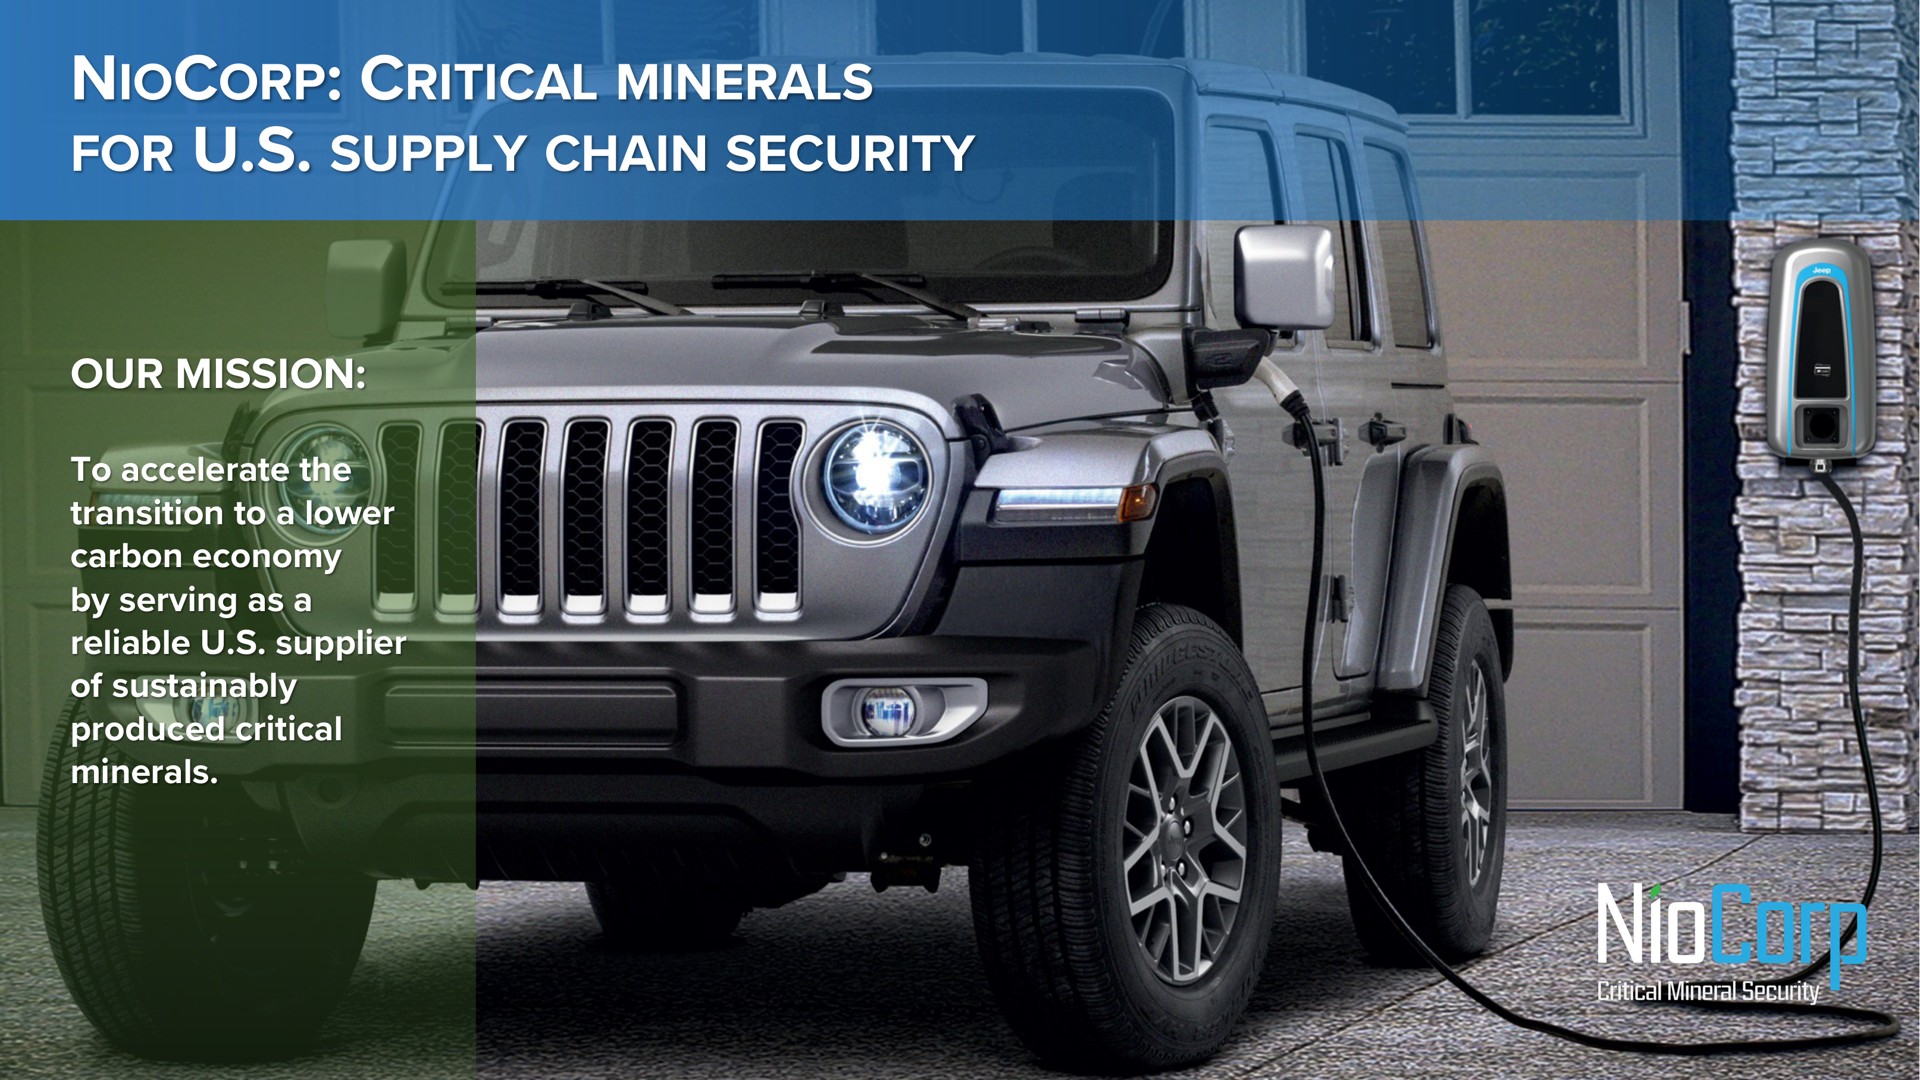 critical minerals for supply chain security our mission to accelerate the transition to a lower carbon economy by serving as a reliable supplier of produced critical minerals afore | NioCorp